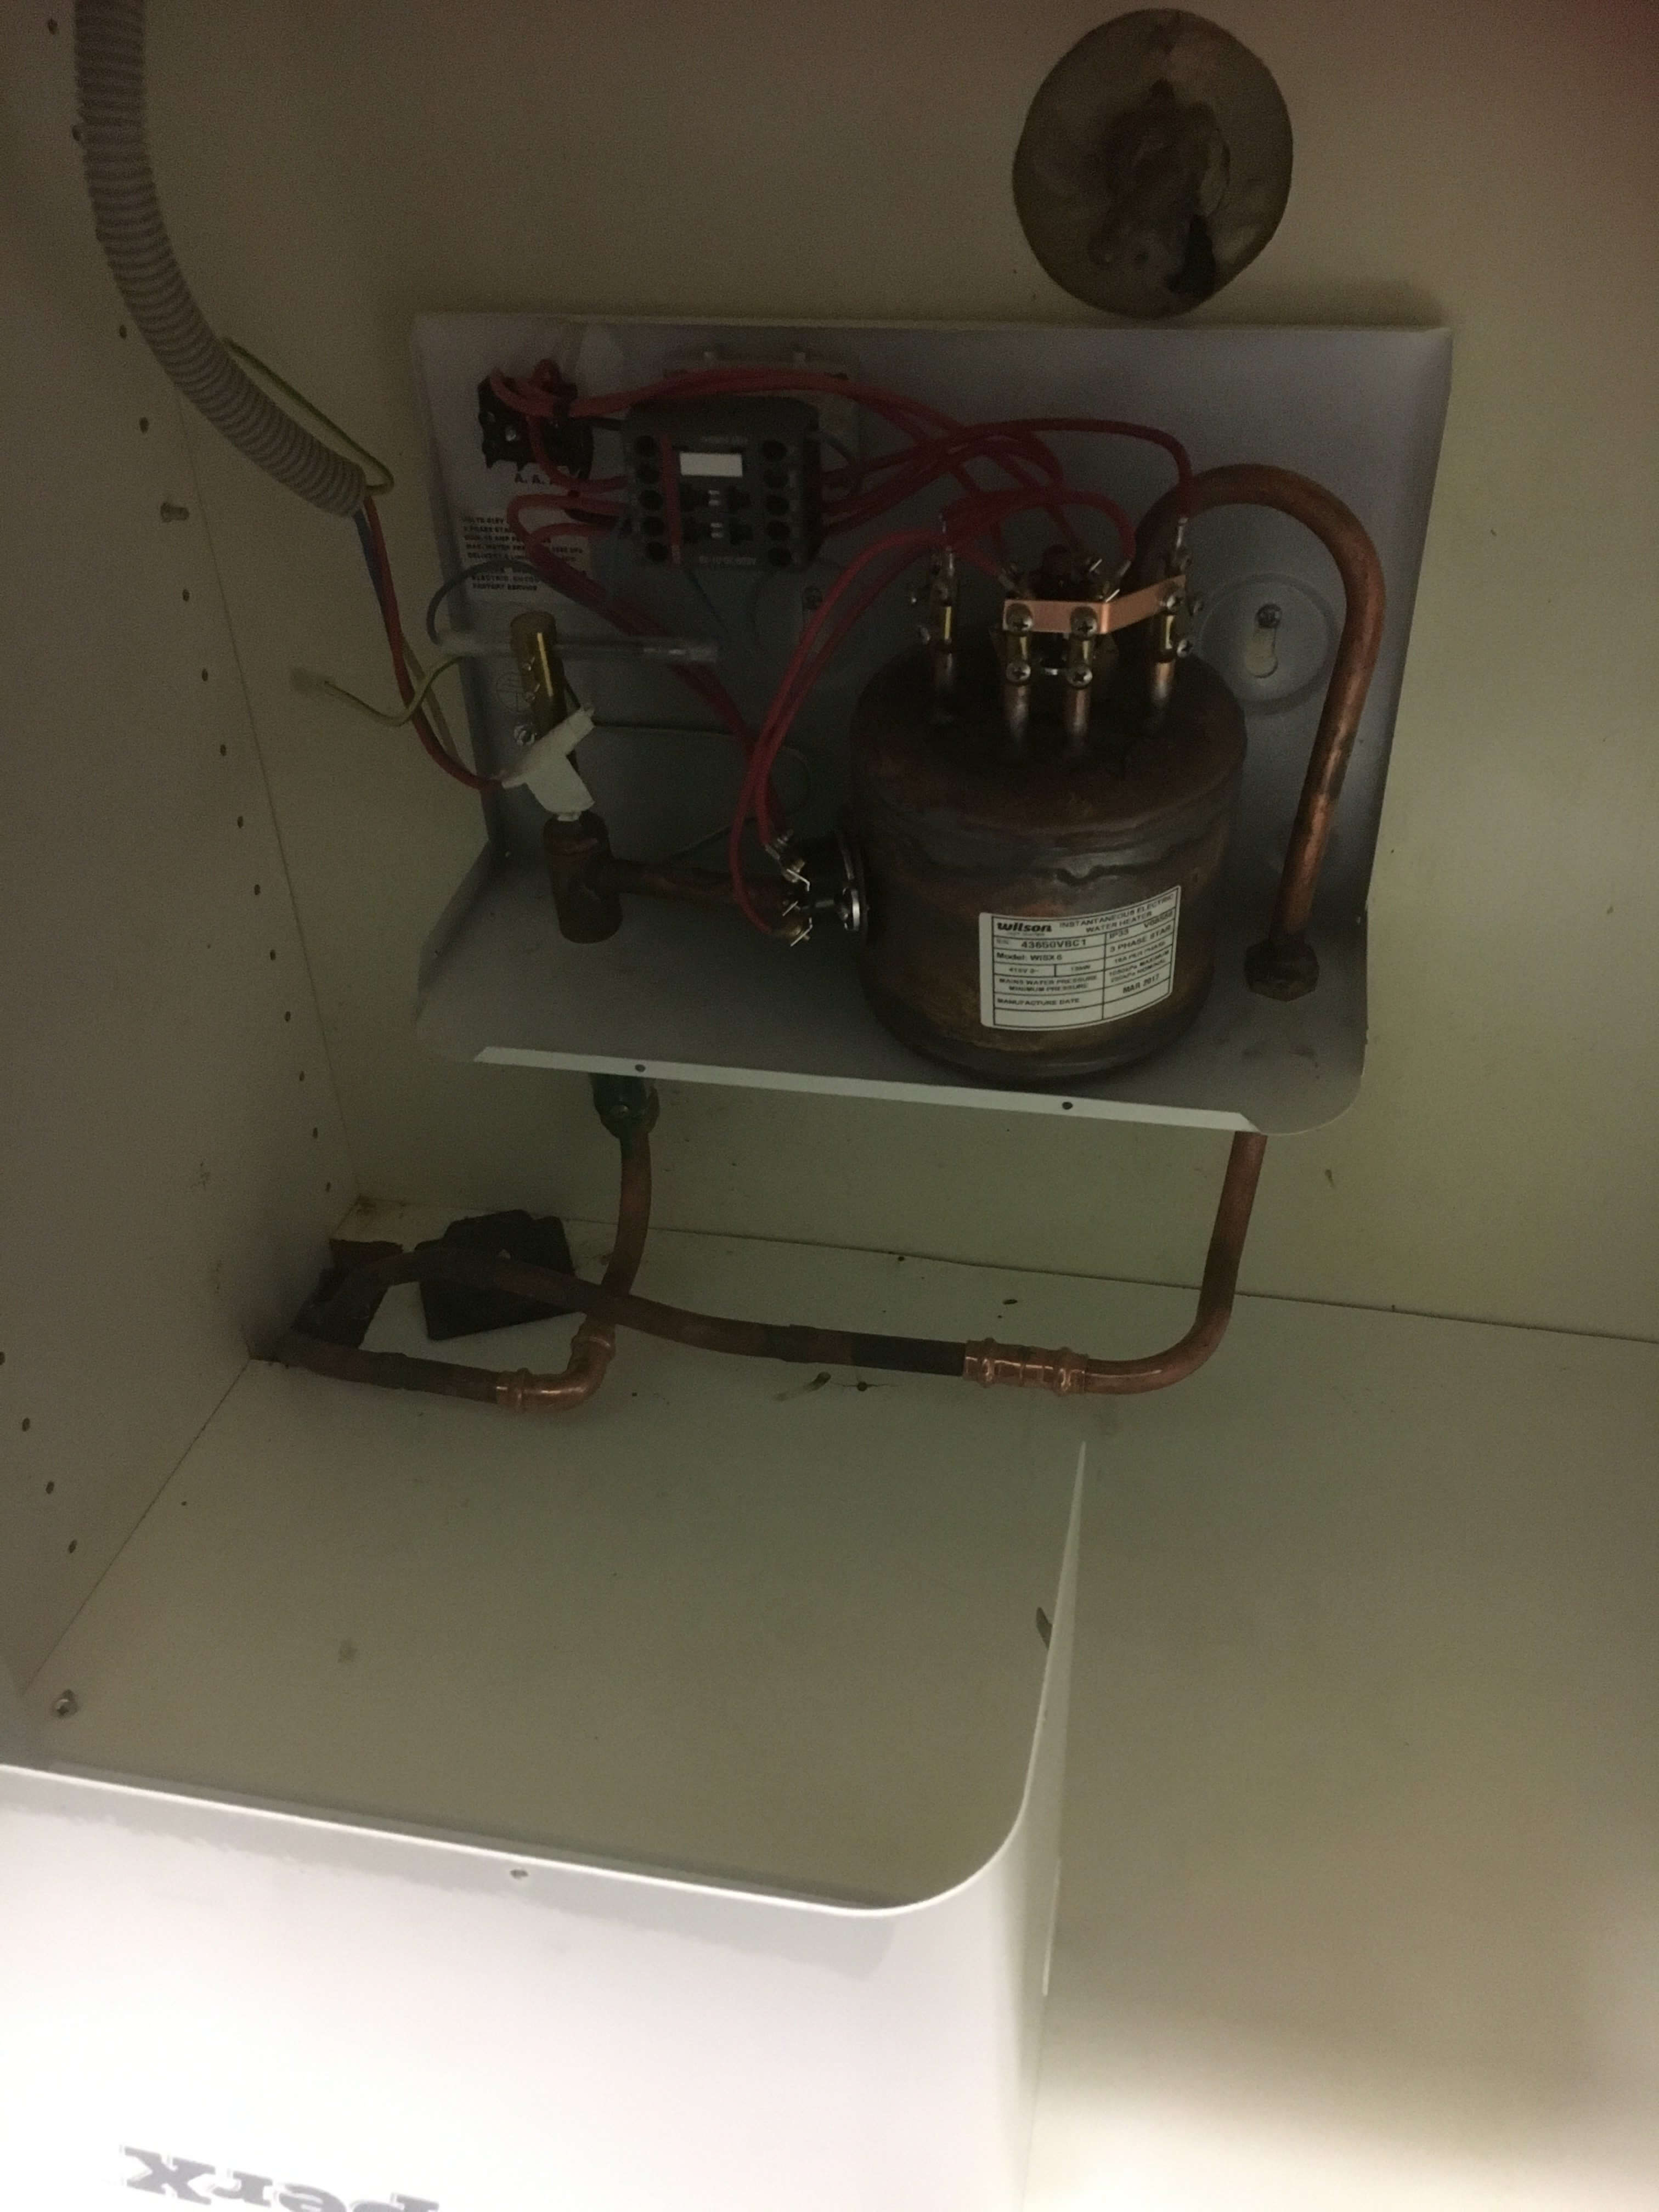 Everyday Plumbers Residential Hotwater Services - Machine in Repair Full View